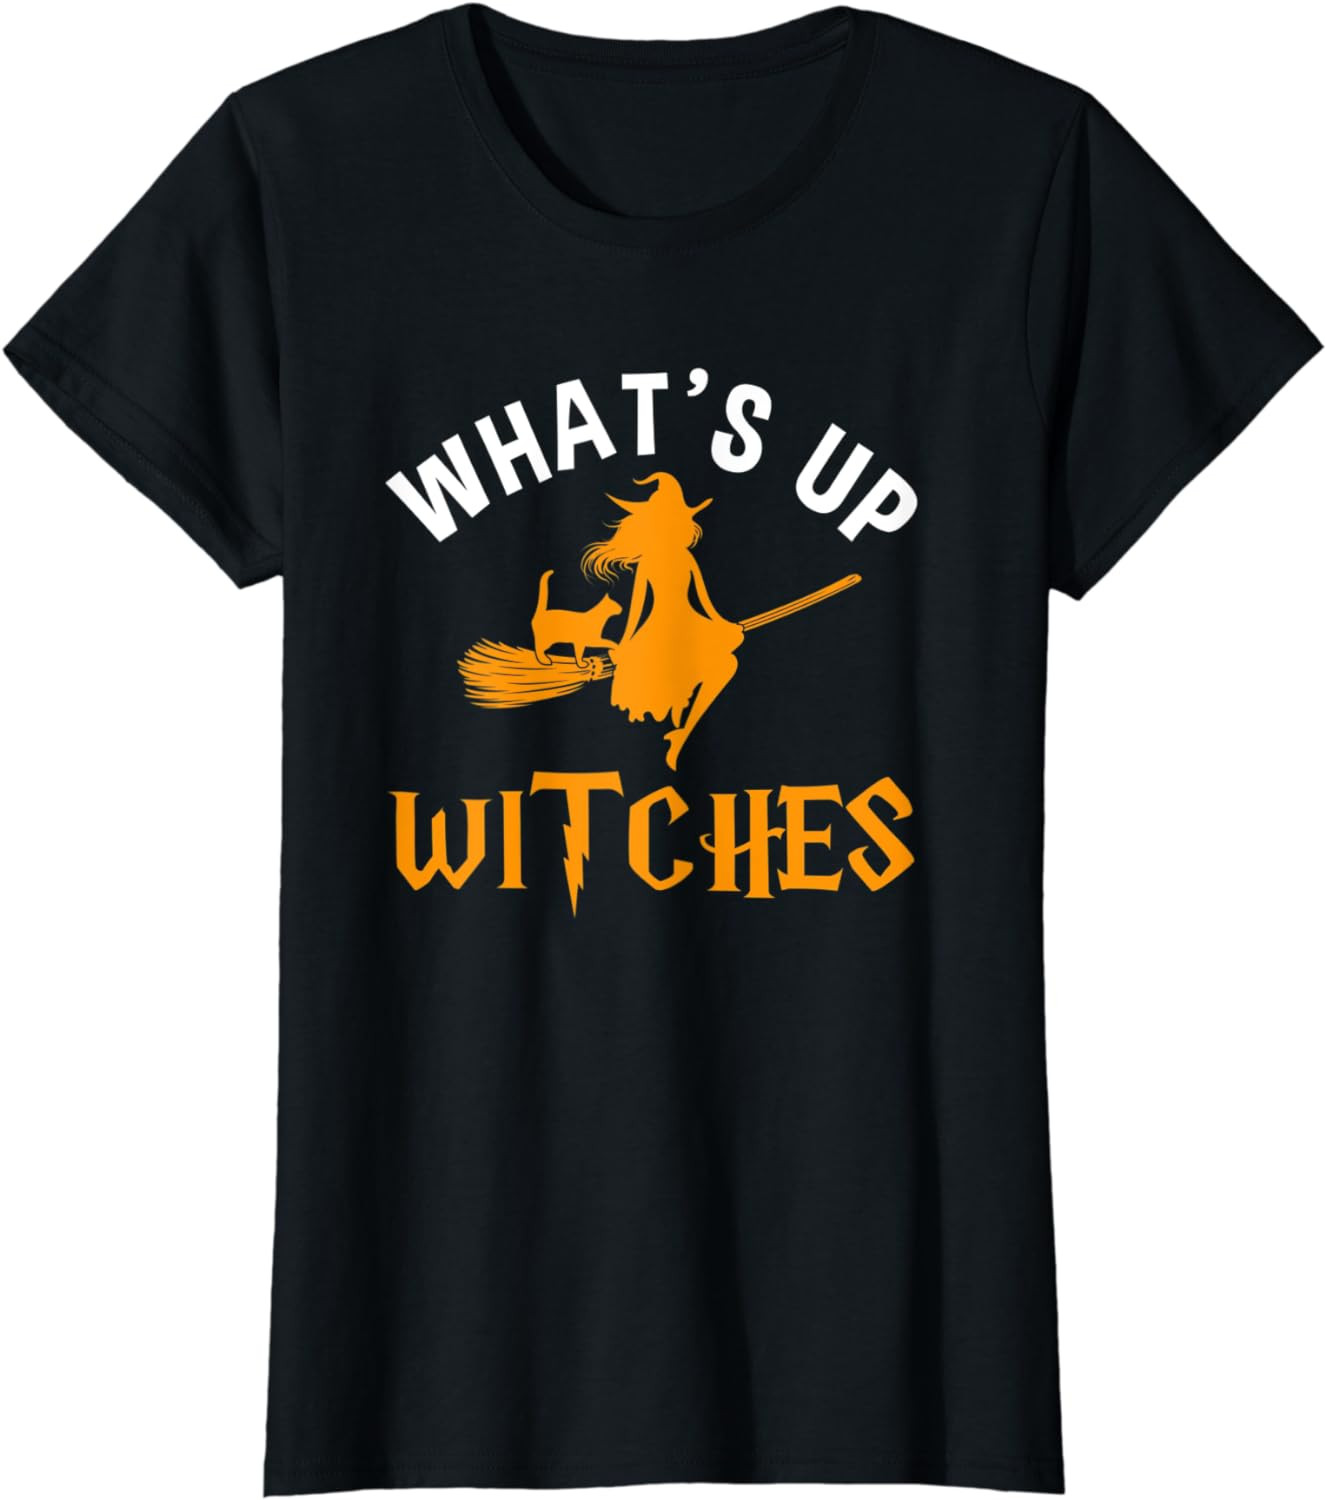 Womens Whats Up Witches Simple Halloween Costume T-Shirt